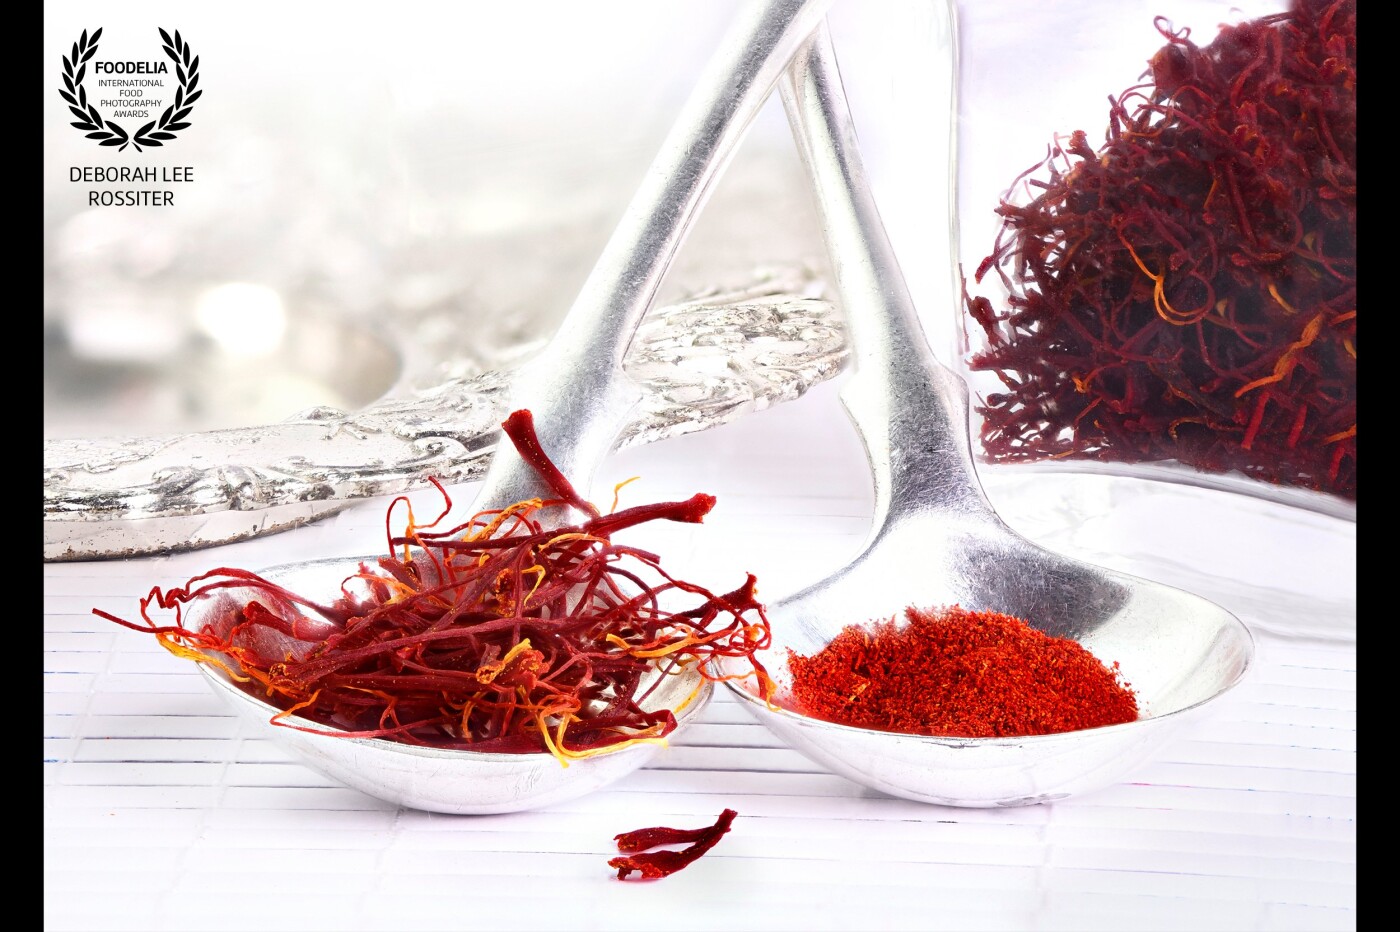 Using saffron for either sweet and savory dishes can be very expensive,  lucky just a very small amount of this spice that weight for weight is more expensive than gold once infused will produce the most intents flavor and color. <br />
My image idea was to reflect the luxury that is associated with this spice 